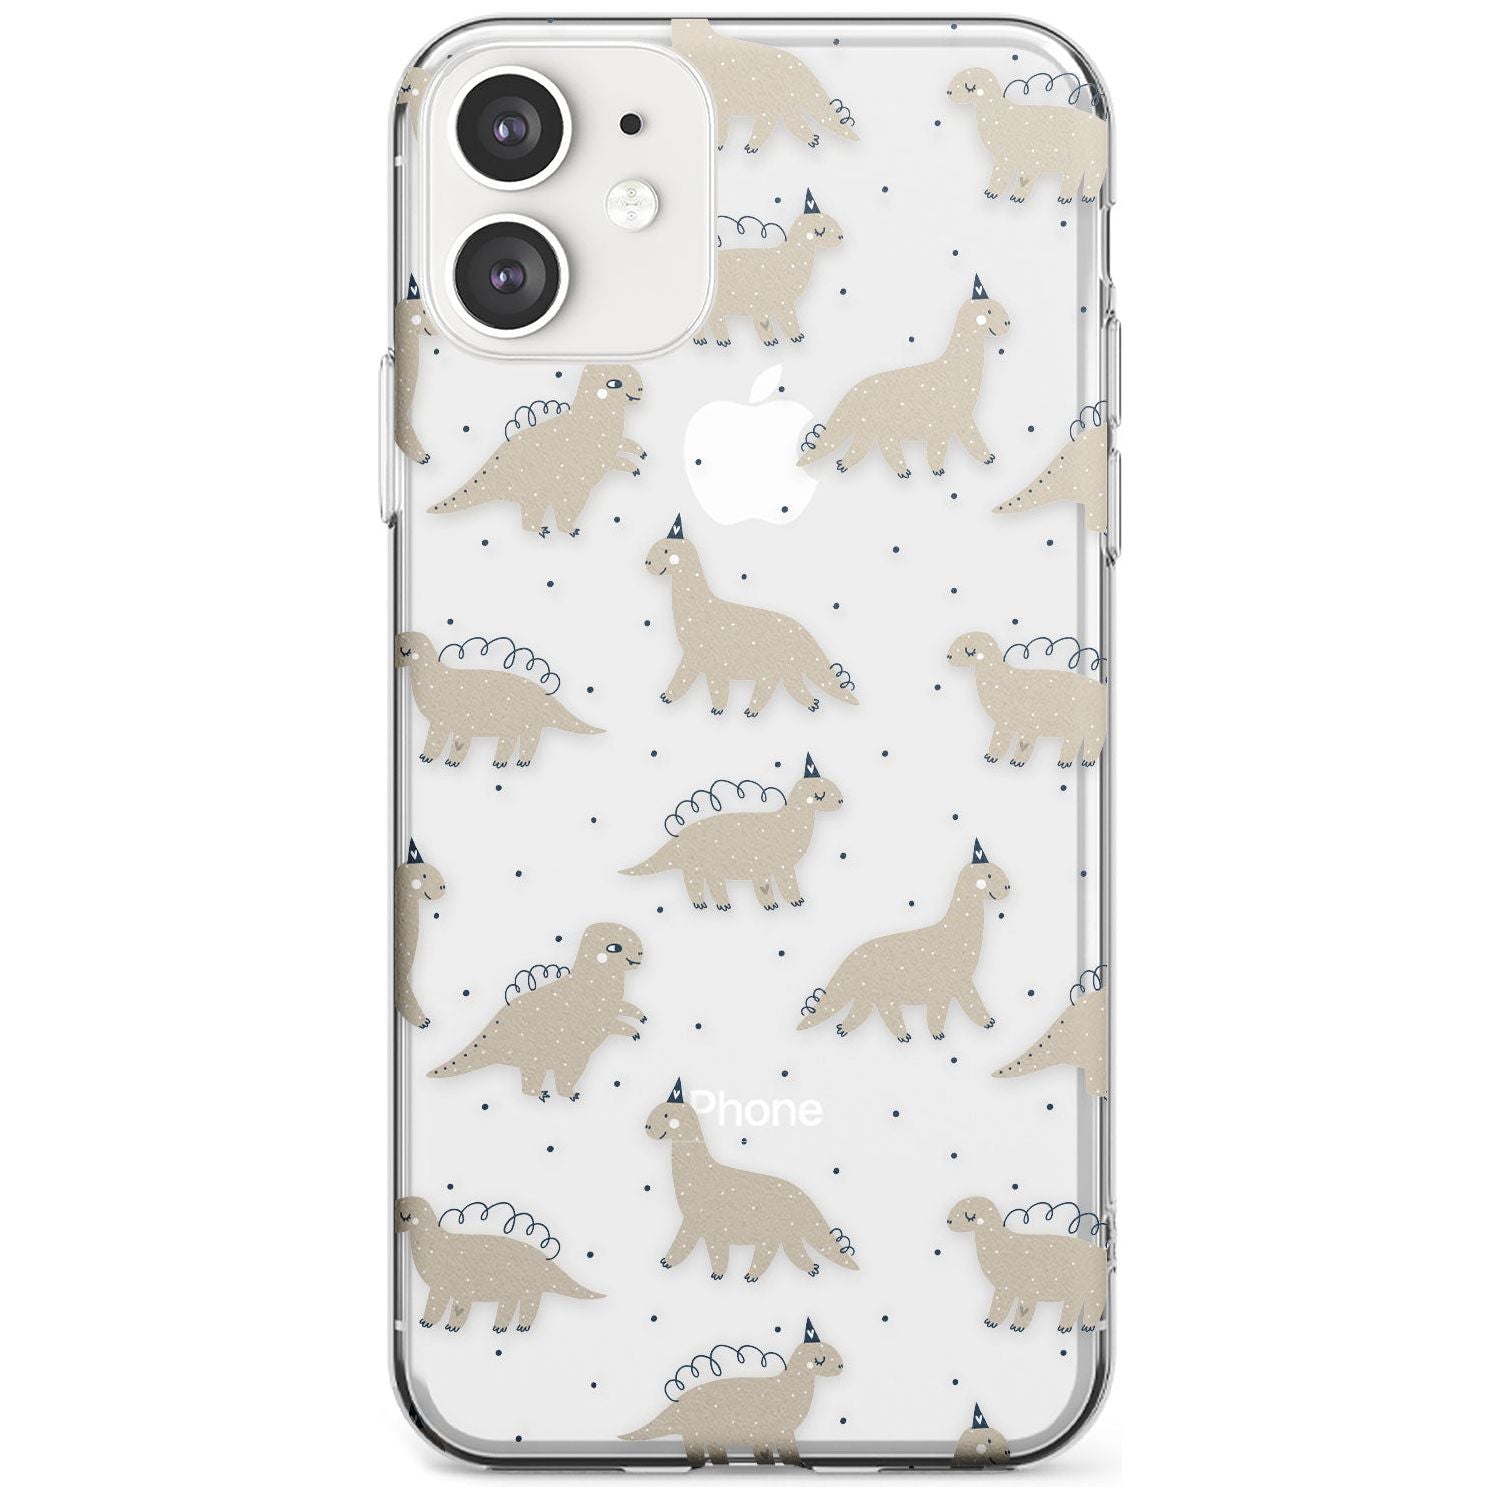 Adorable Dinosaurs Pattern (Clear) Slim TPU Phone Case for iPhone 11